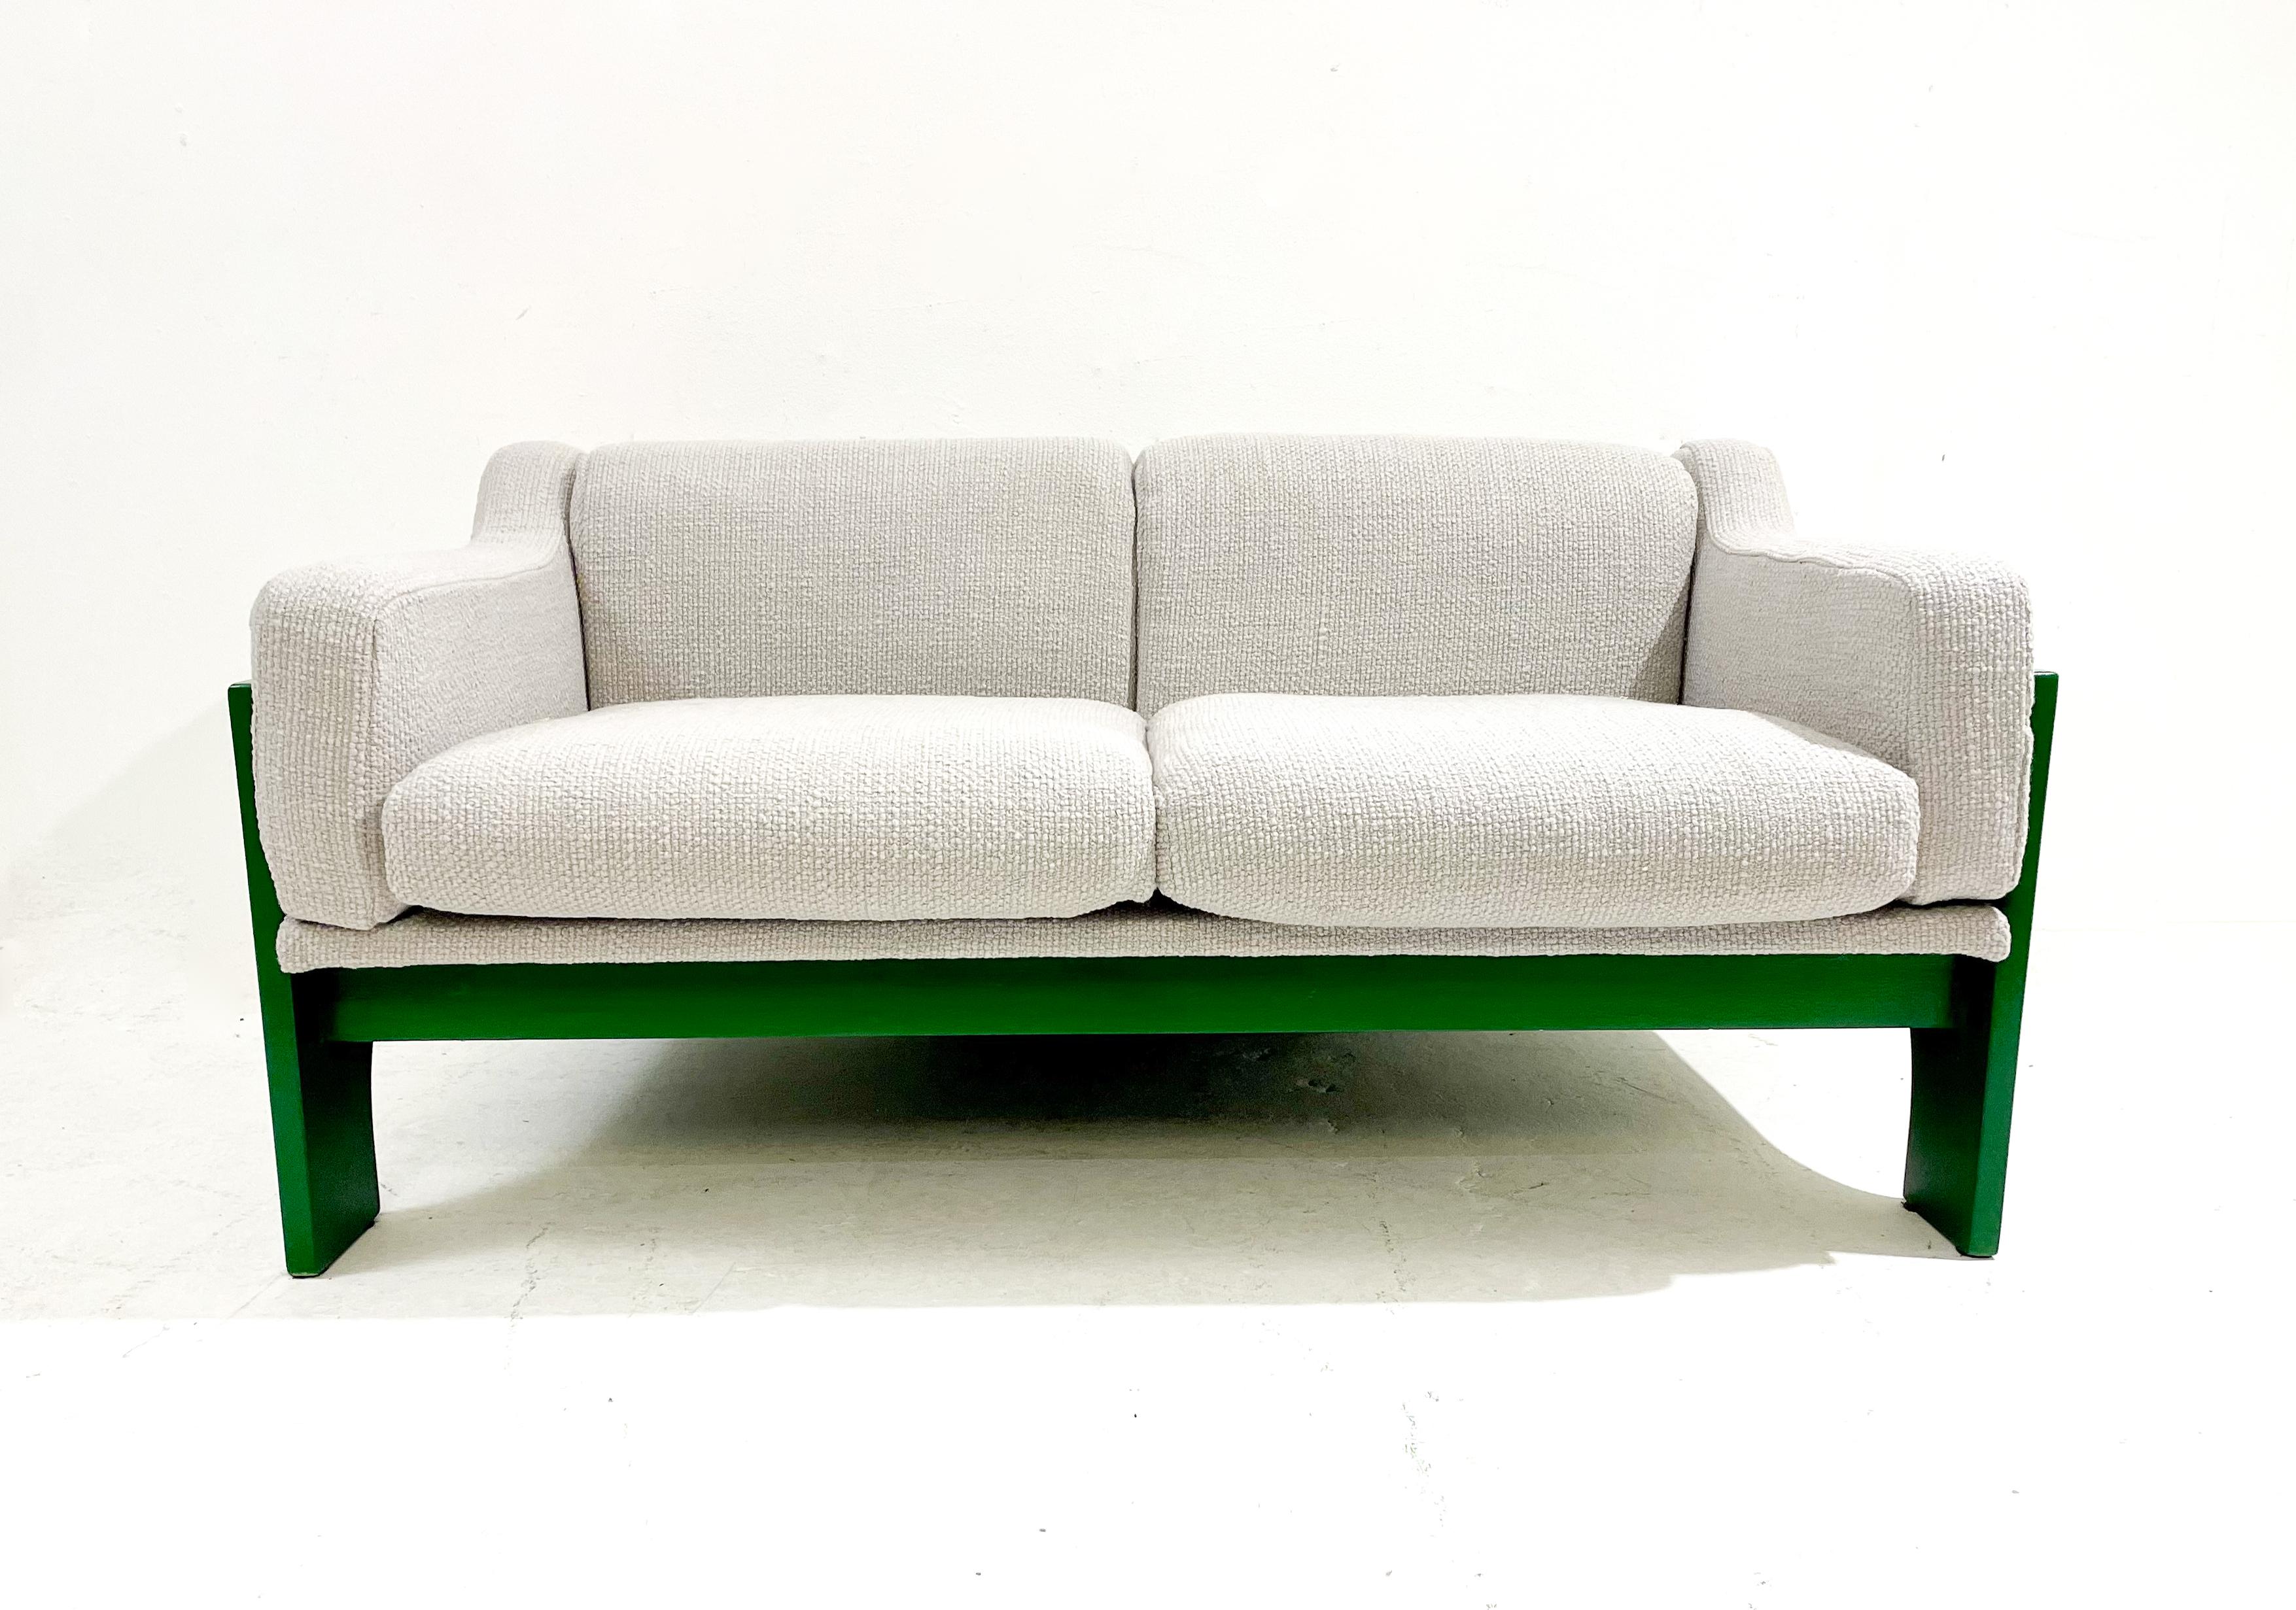 Italian Mid-Century Green Wooden Lacquered Two Seater Sofa by Saporiti, Italy, 1960s For Sale